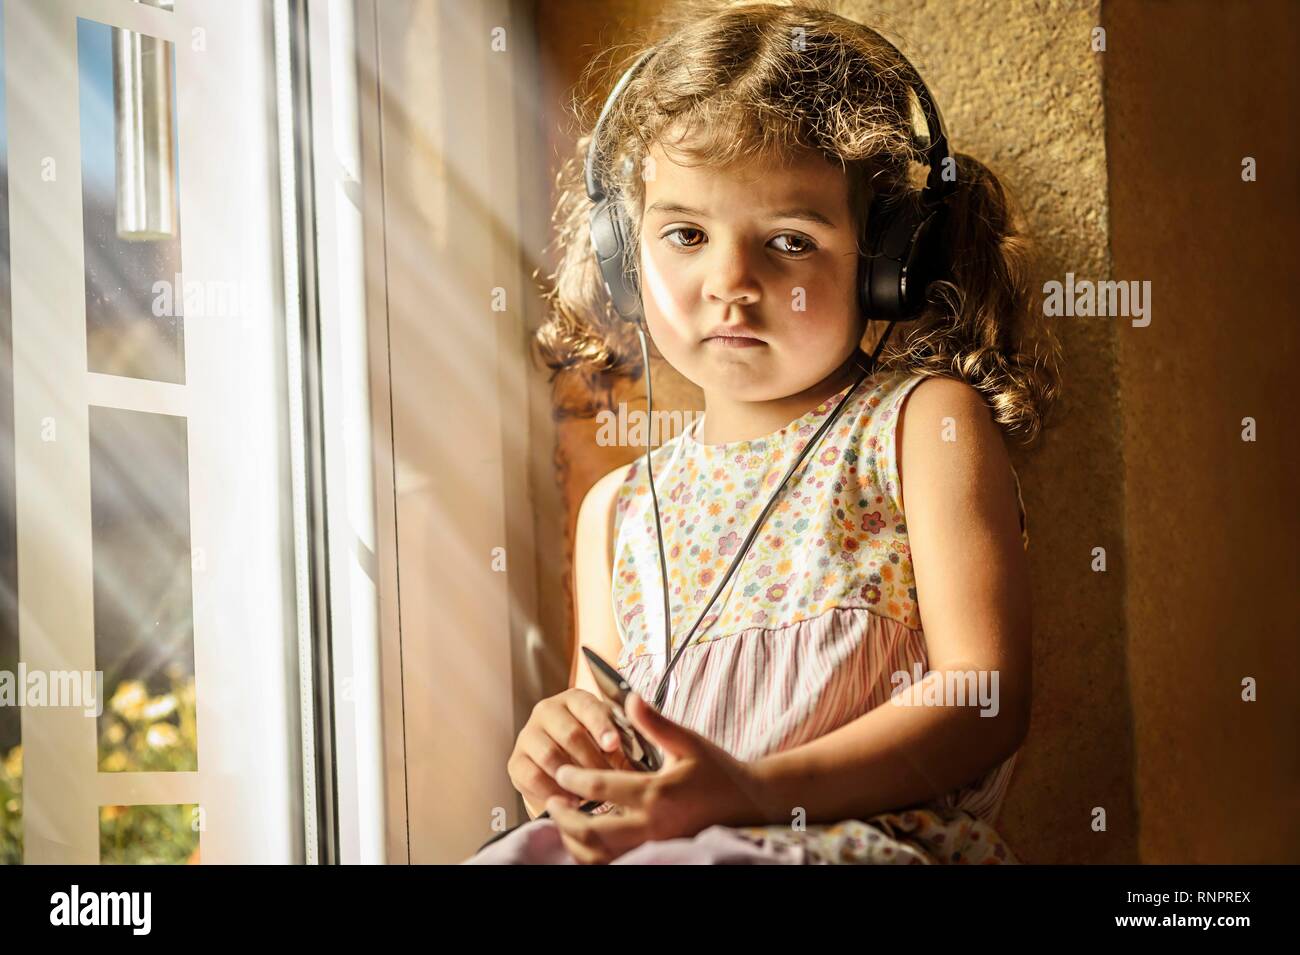 Girl, 3 years old, listens to thoughtful music with headphones, Germany Stock Photo